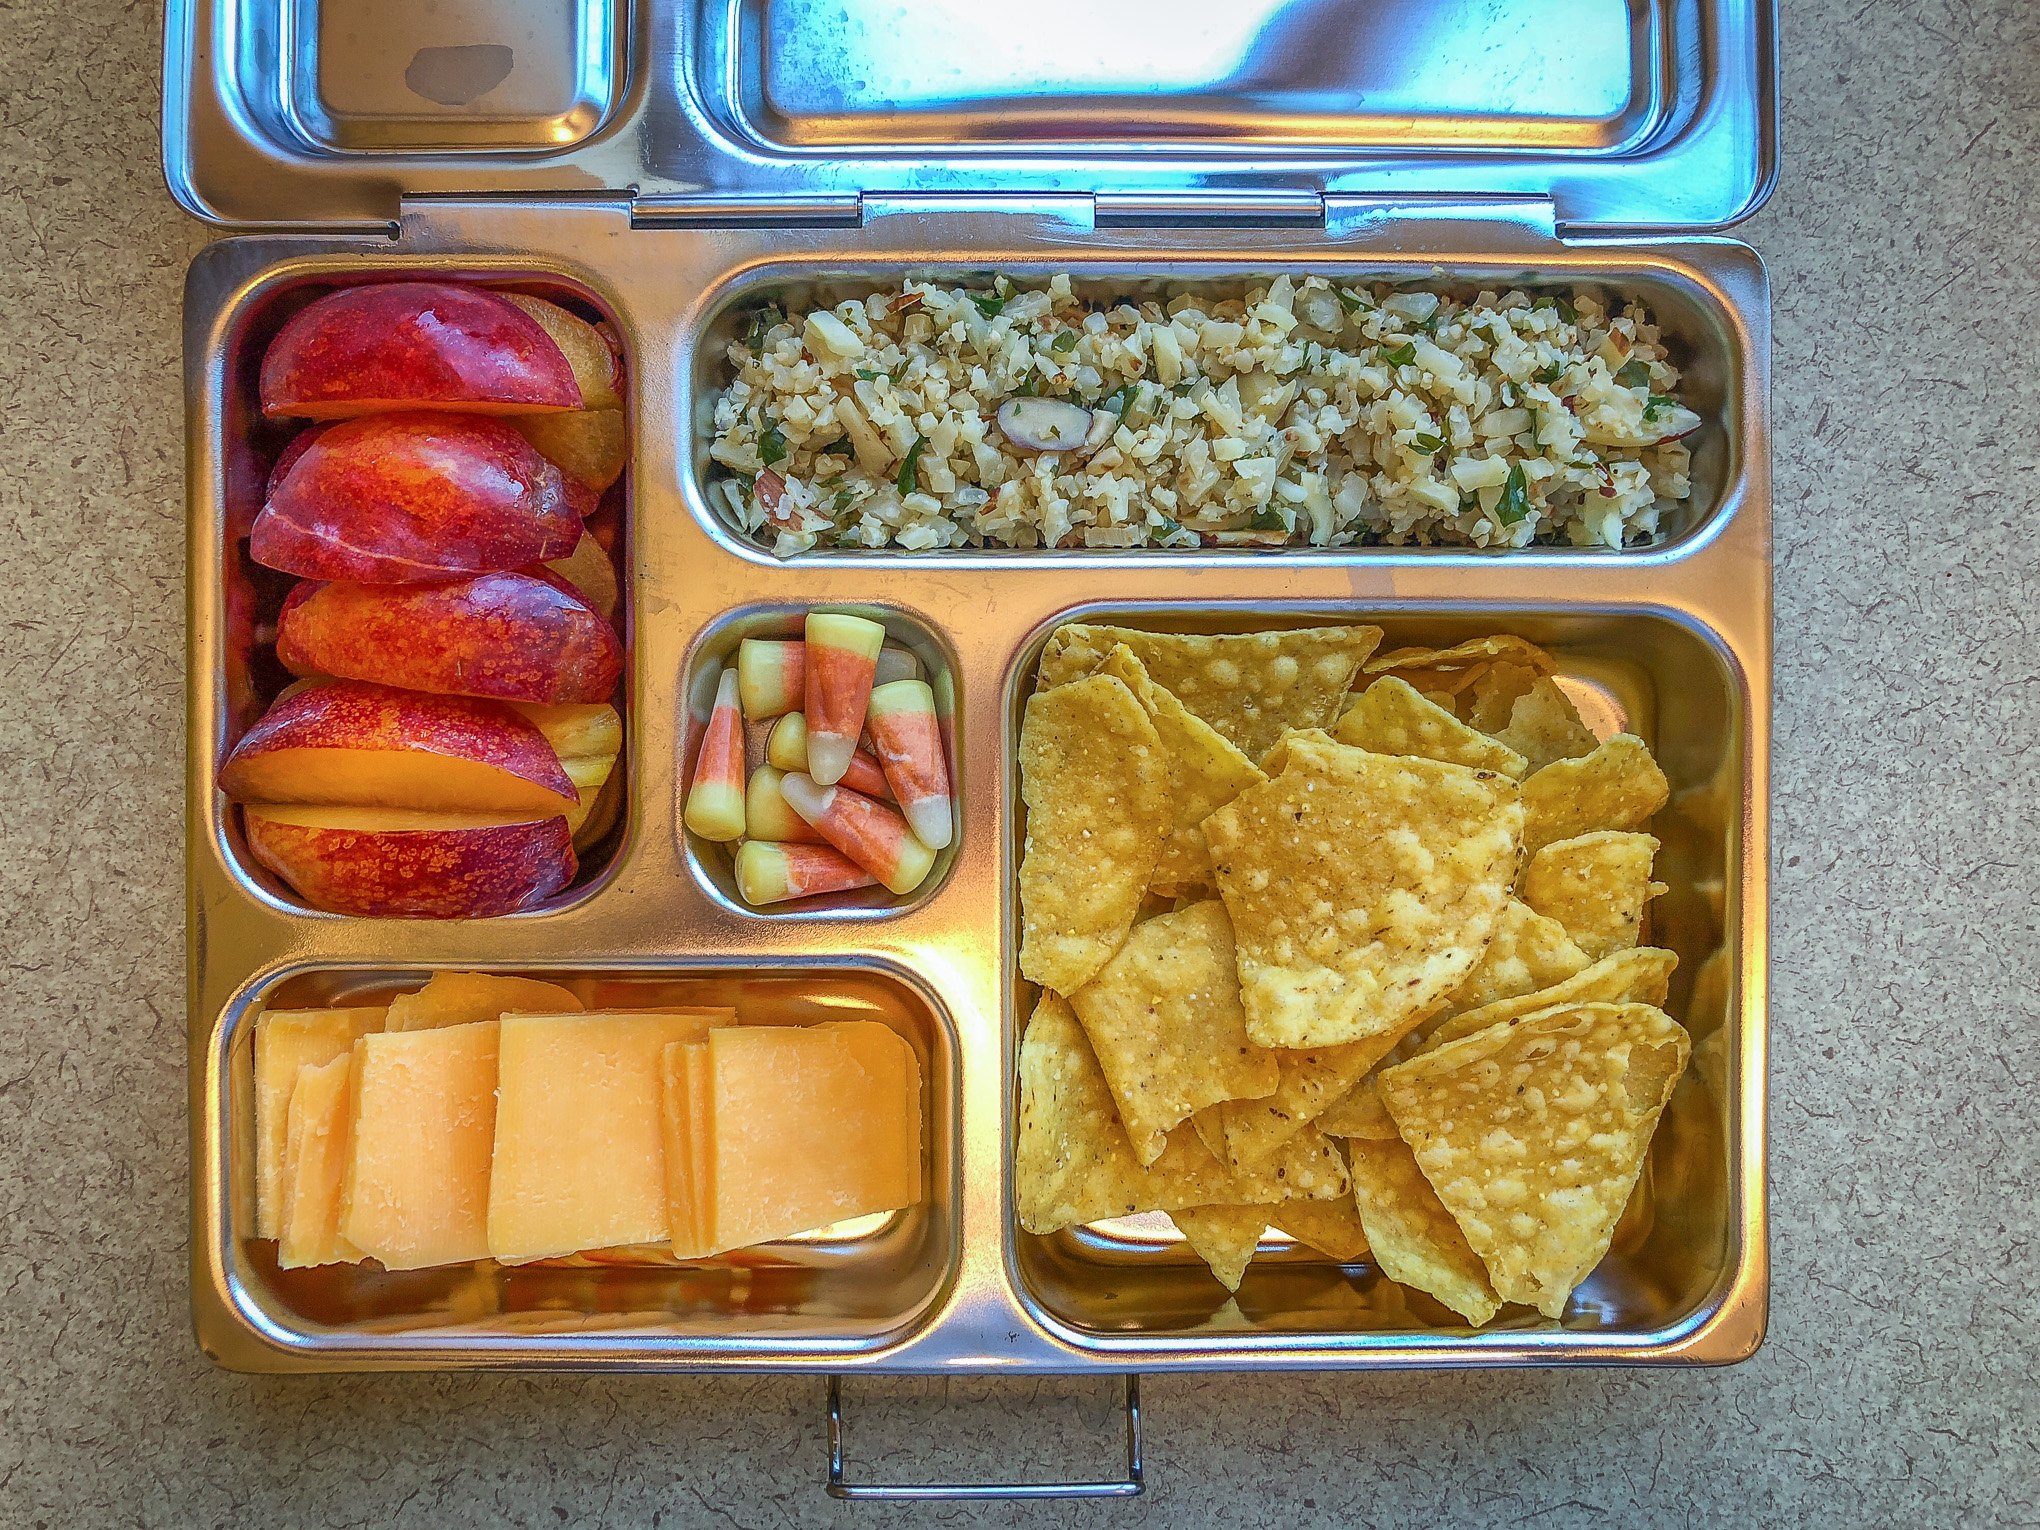 Bento box filled with fruit and vegetables